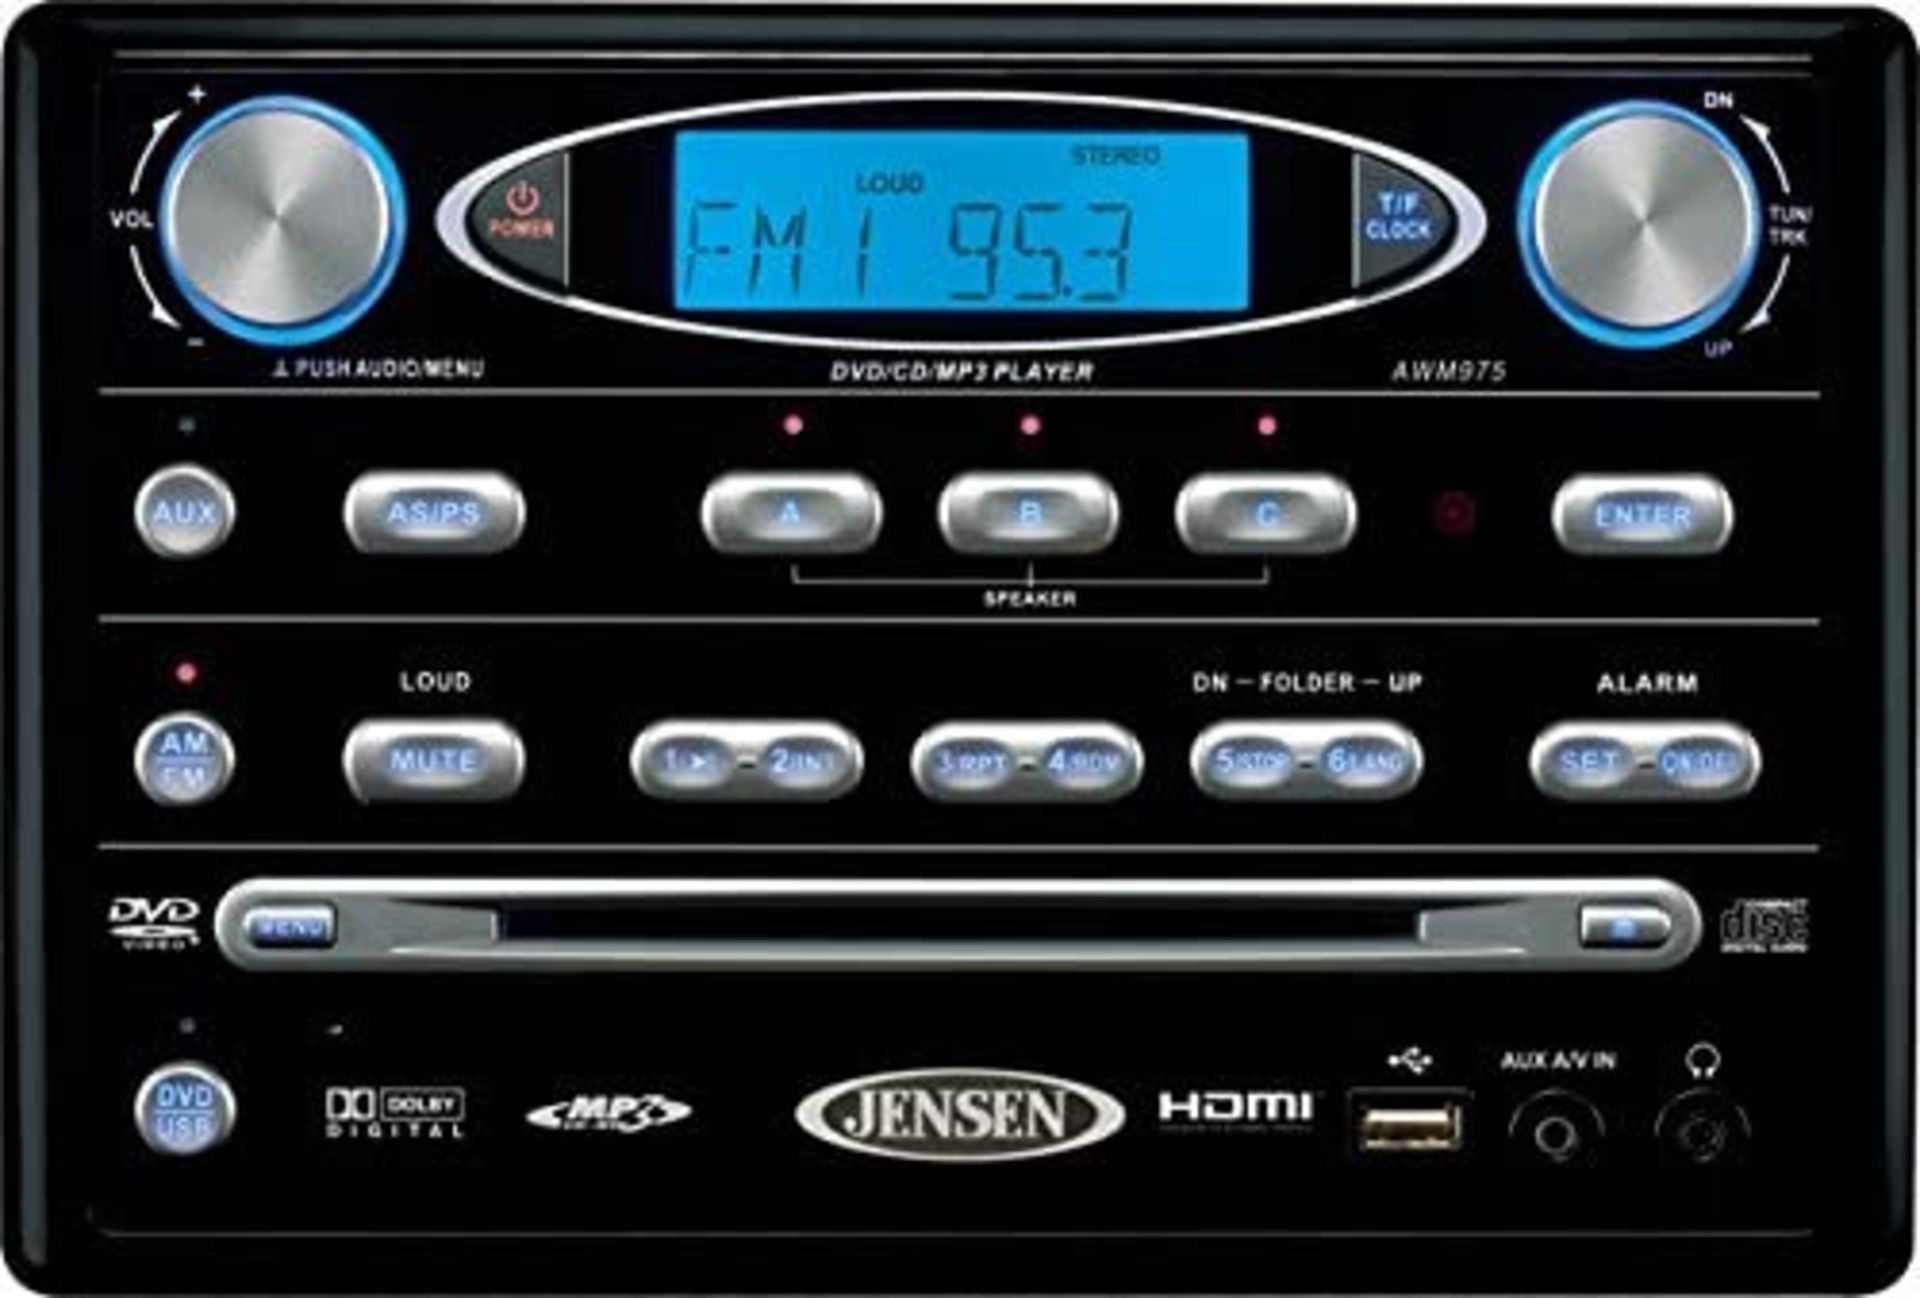 1 x Jenson AWM975 Entertainment System - Features DVD Player, CD, MP3, USB, HDMI Out, FM/AM Radio